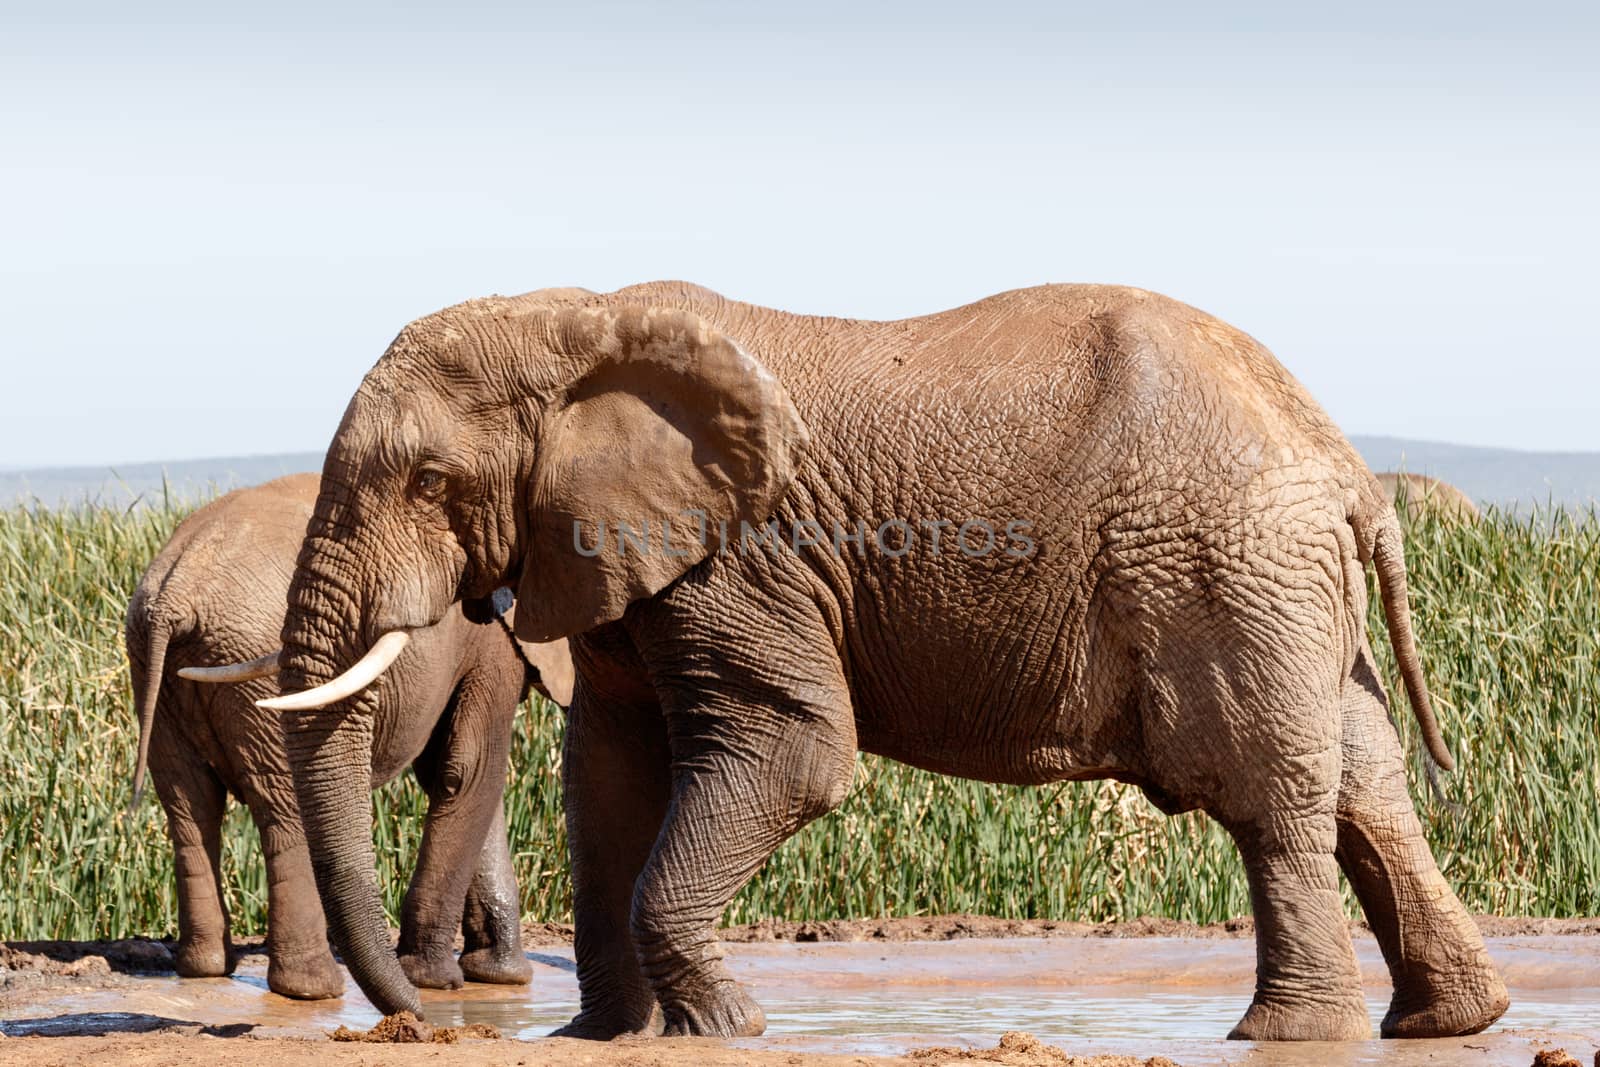 African Bush Elephant - Standing and playing in the mud on a hot sunny day
in Addo Elephant National Park.